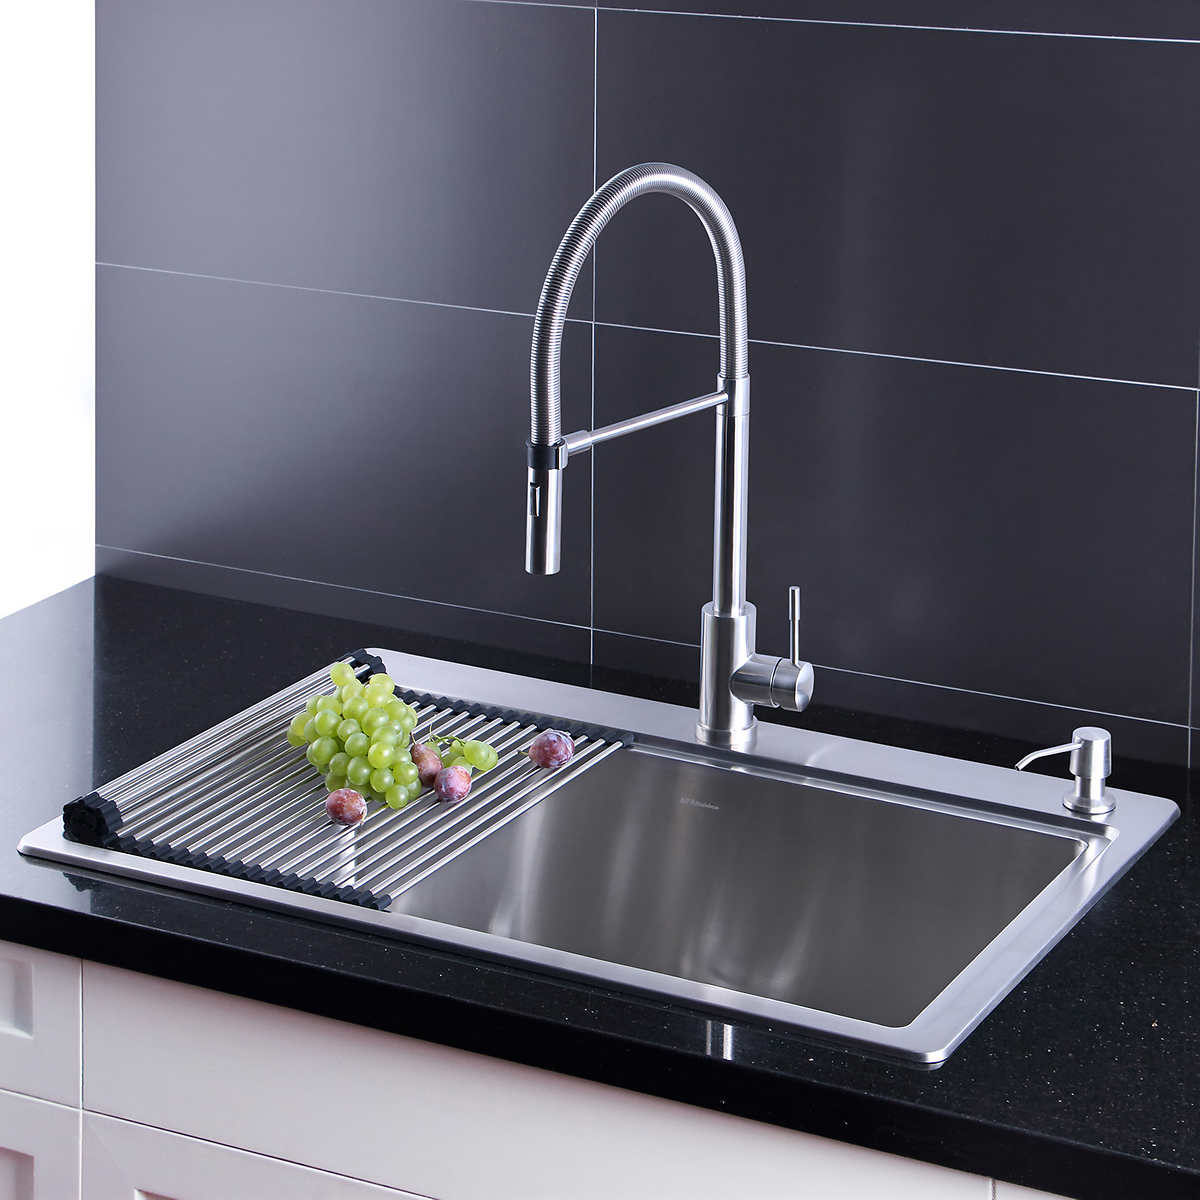 Afa Stainless 33 Inch Sink And Semi Pro Faucet Combo